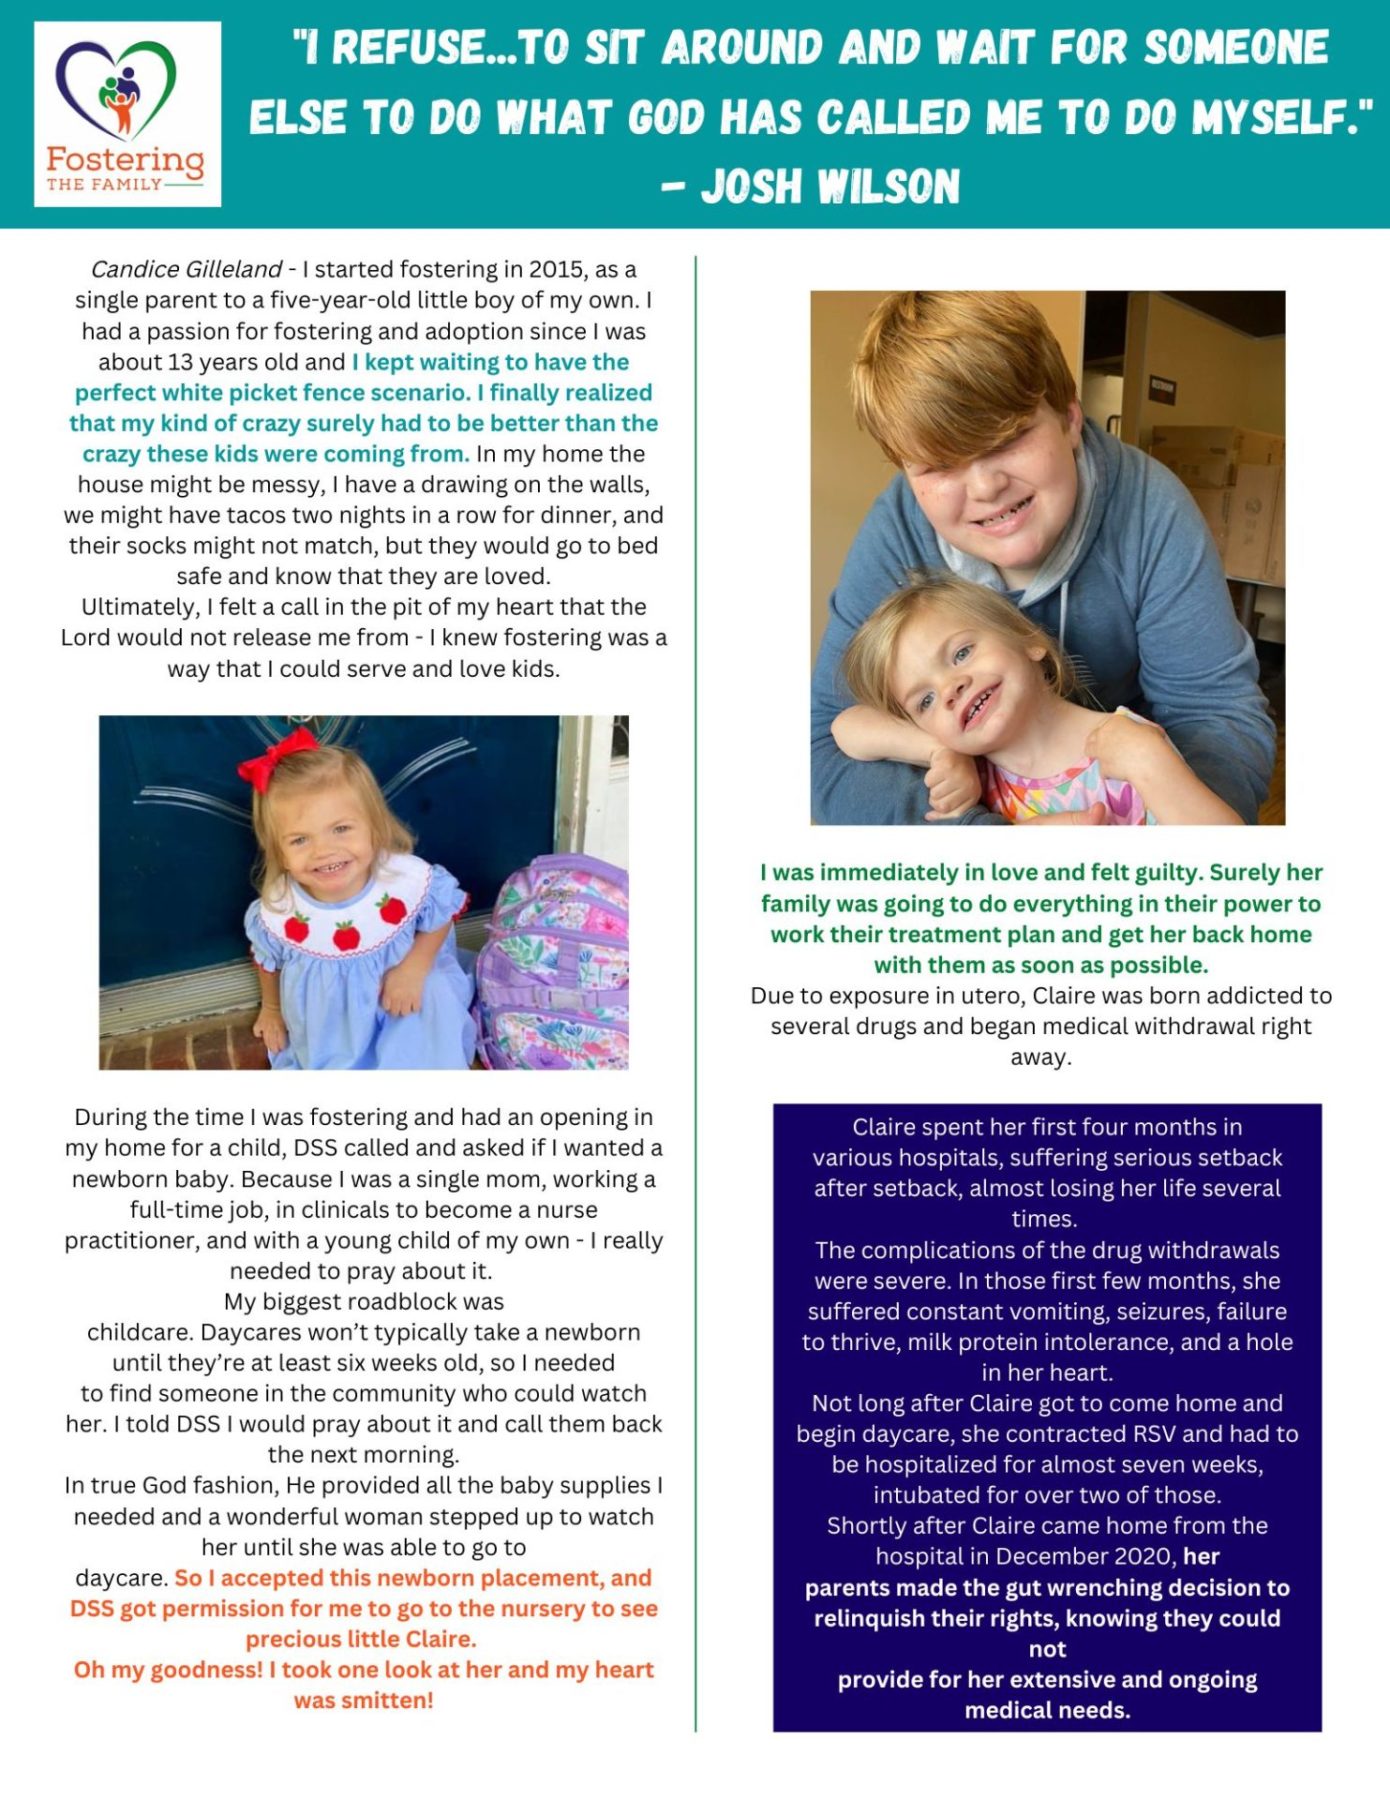 Direct Mailer attachment - Candice's fostering and adoption story.